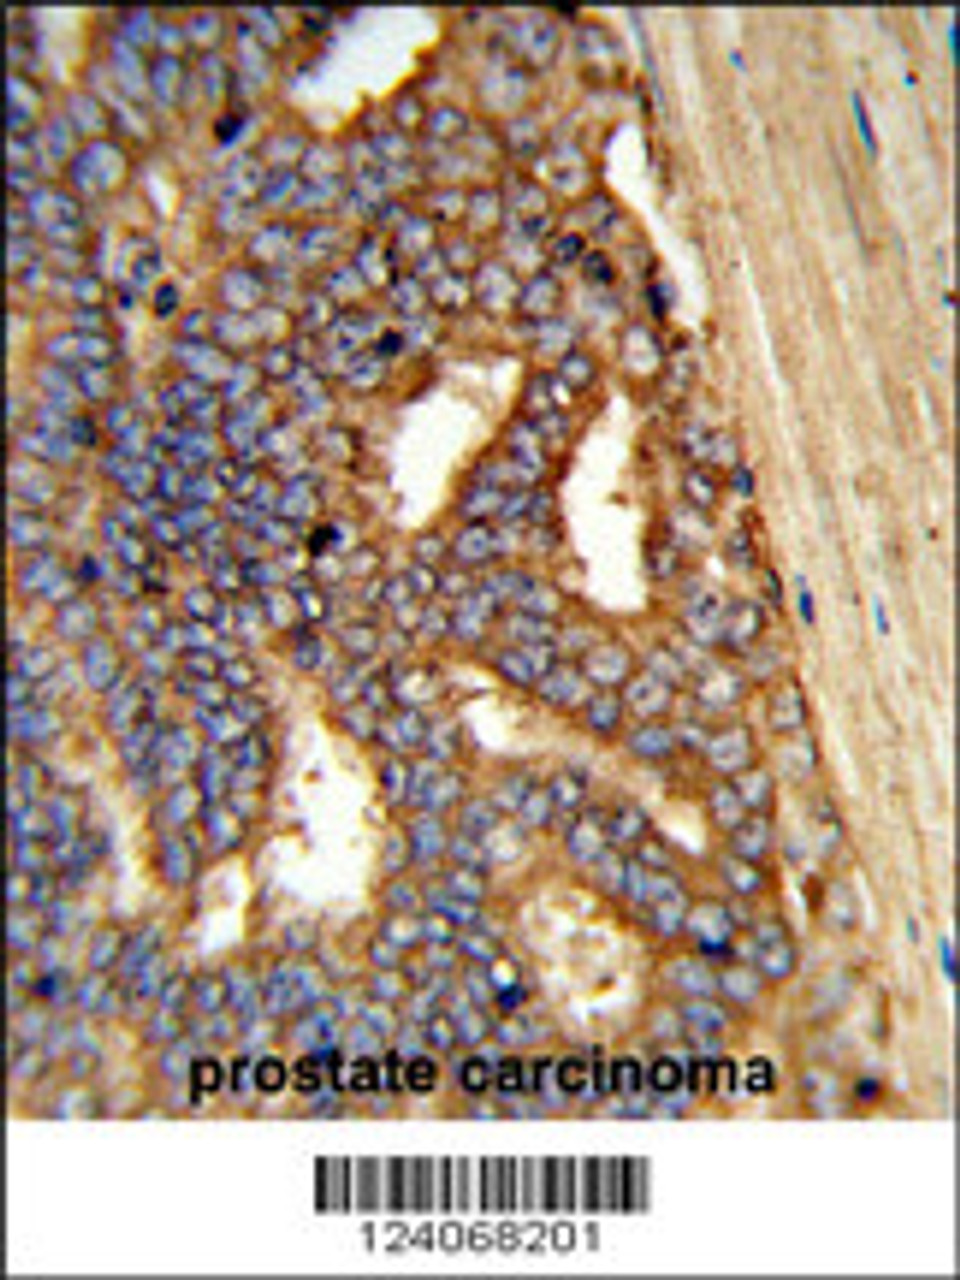 Formalin-fixed and paraffin-embedded human prostate carcinoma reacted with AMY1A Antibody, which was peroxidase-conjugated to the secondary antibody, followed by DAB staining.